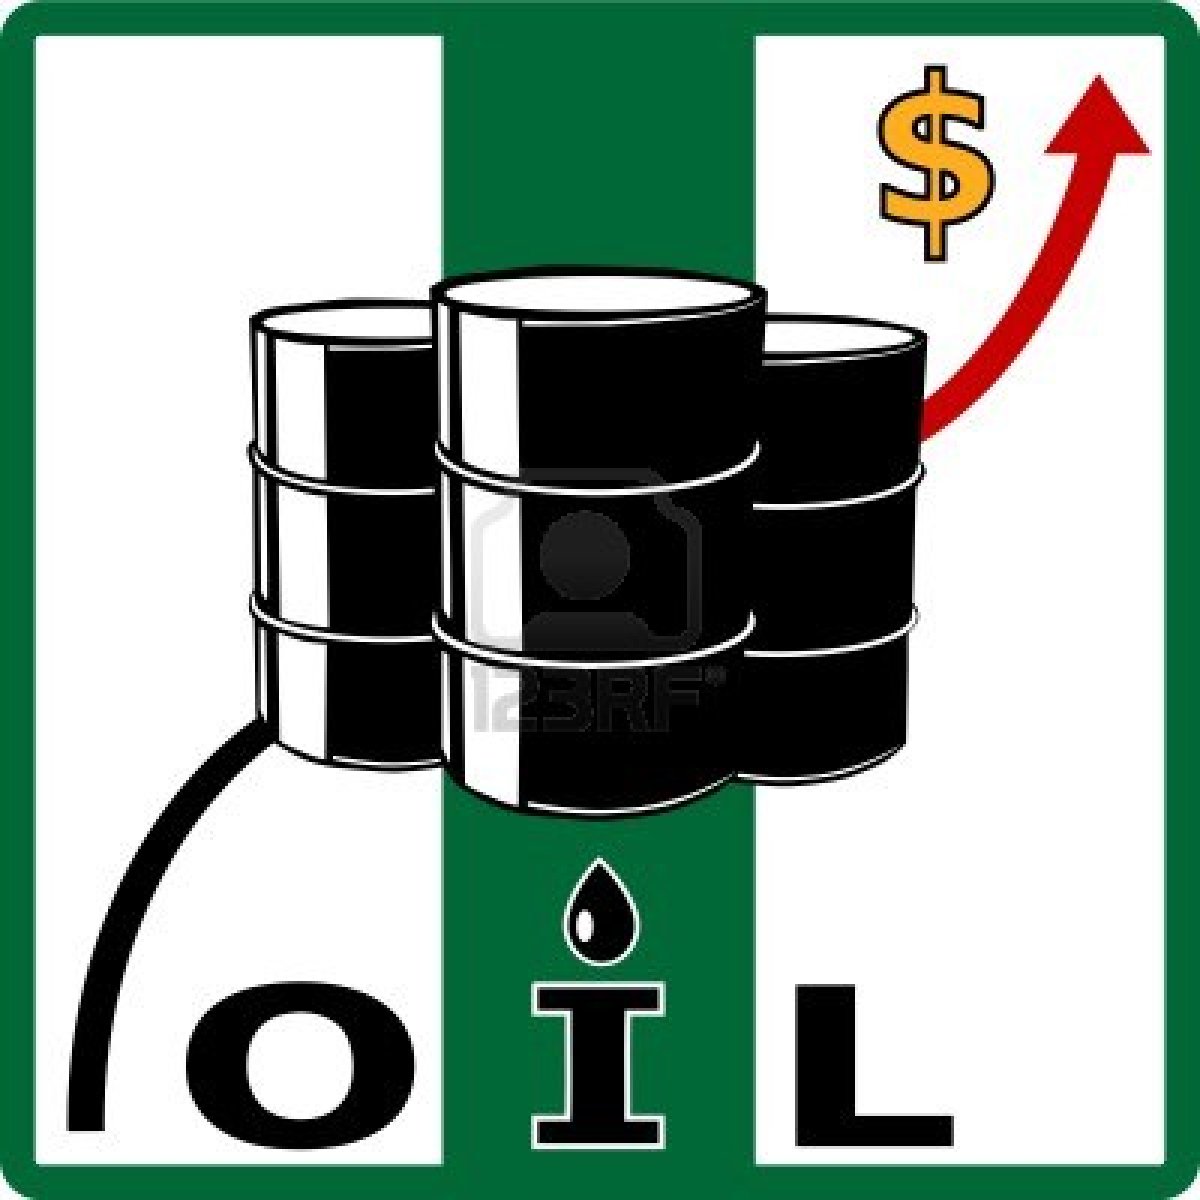 15506523-crude-oil-price-rise--vector-illustration-with-barrel-and-diagram